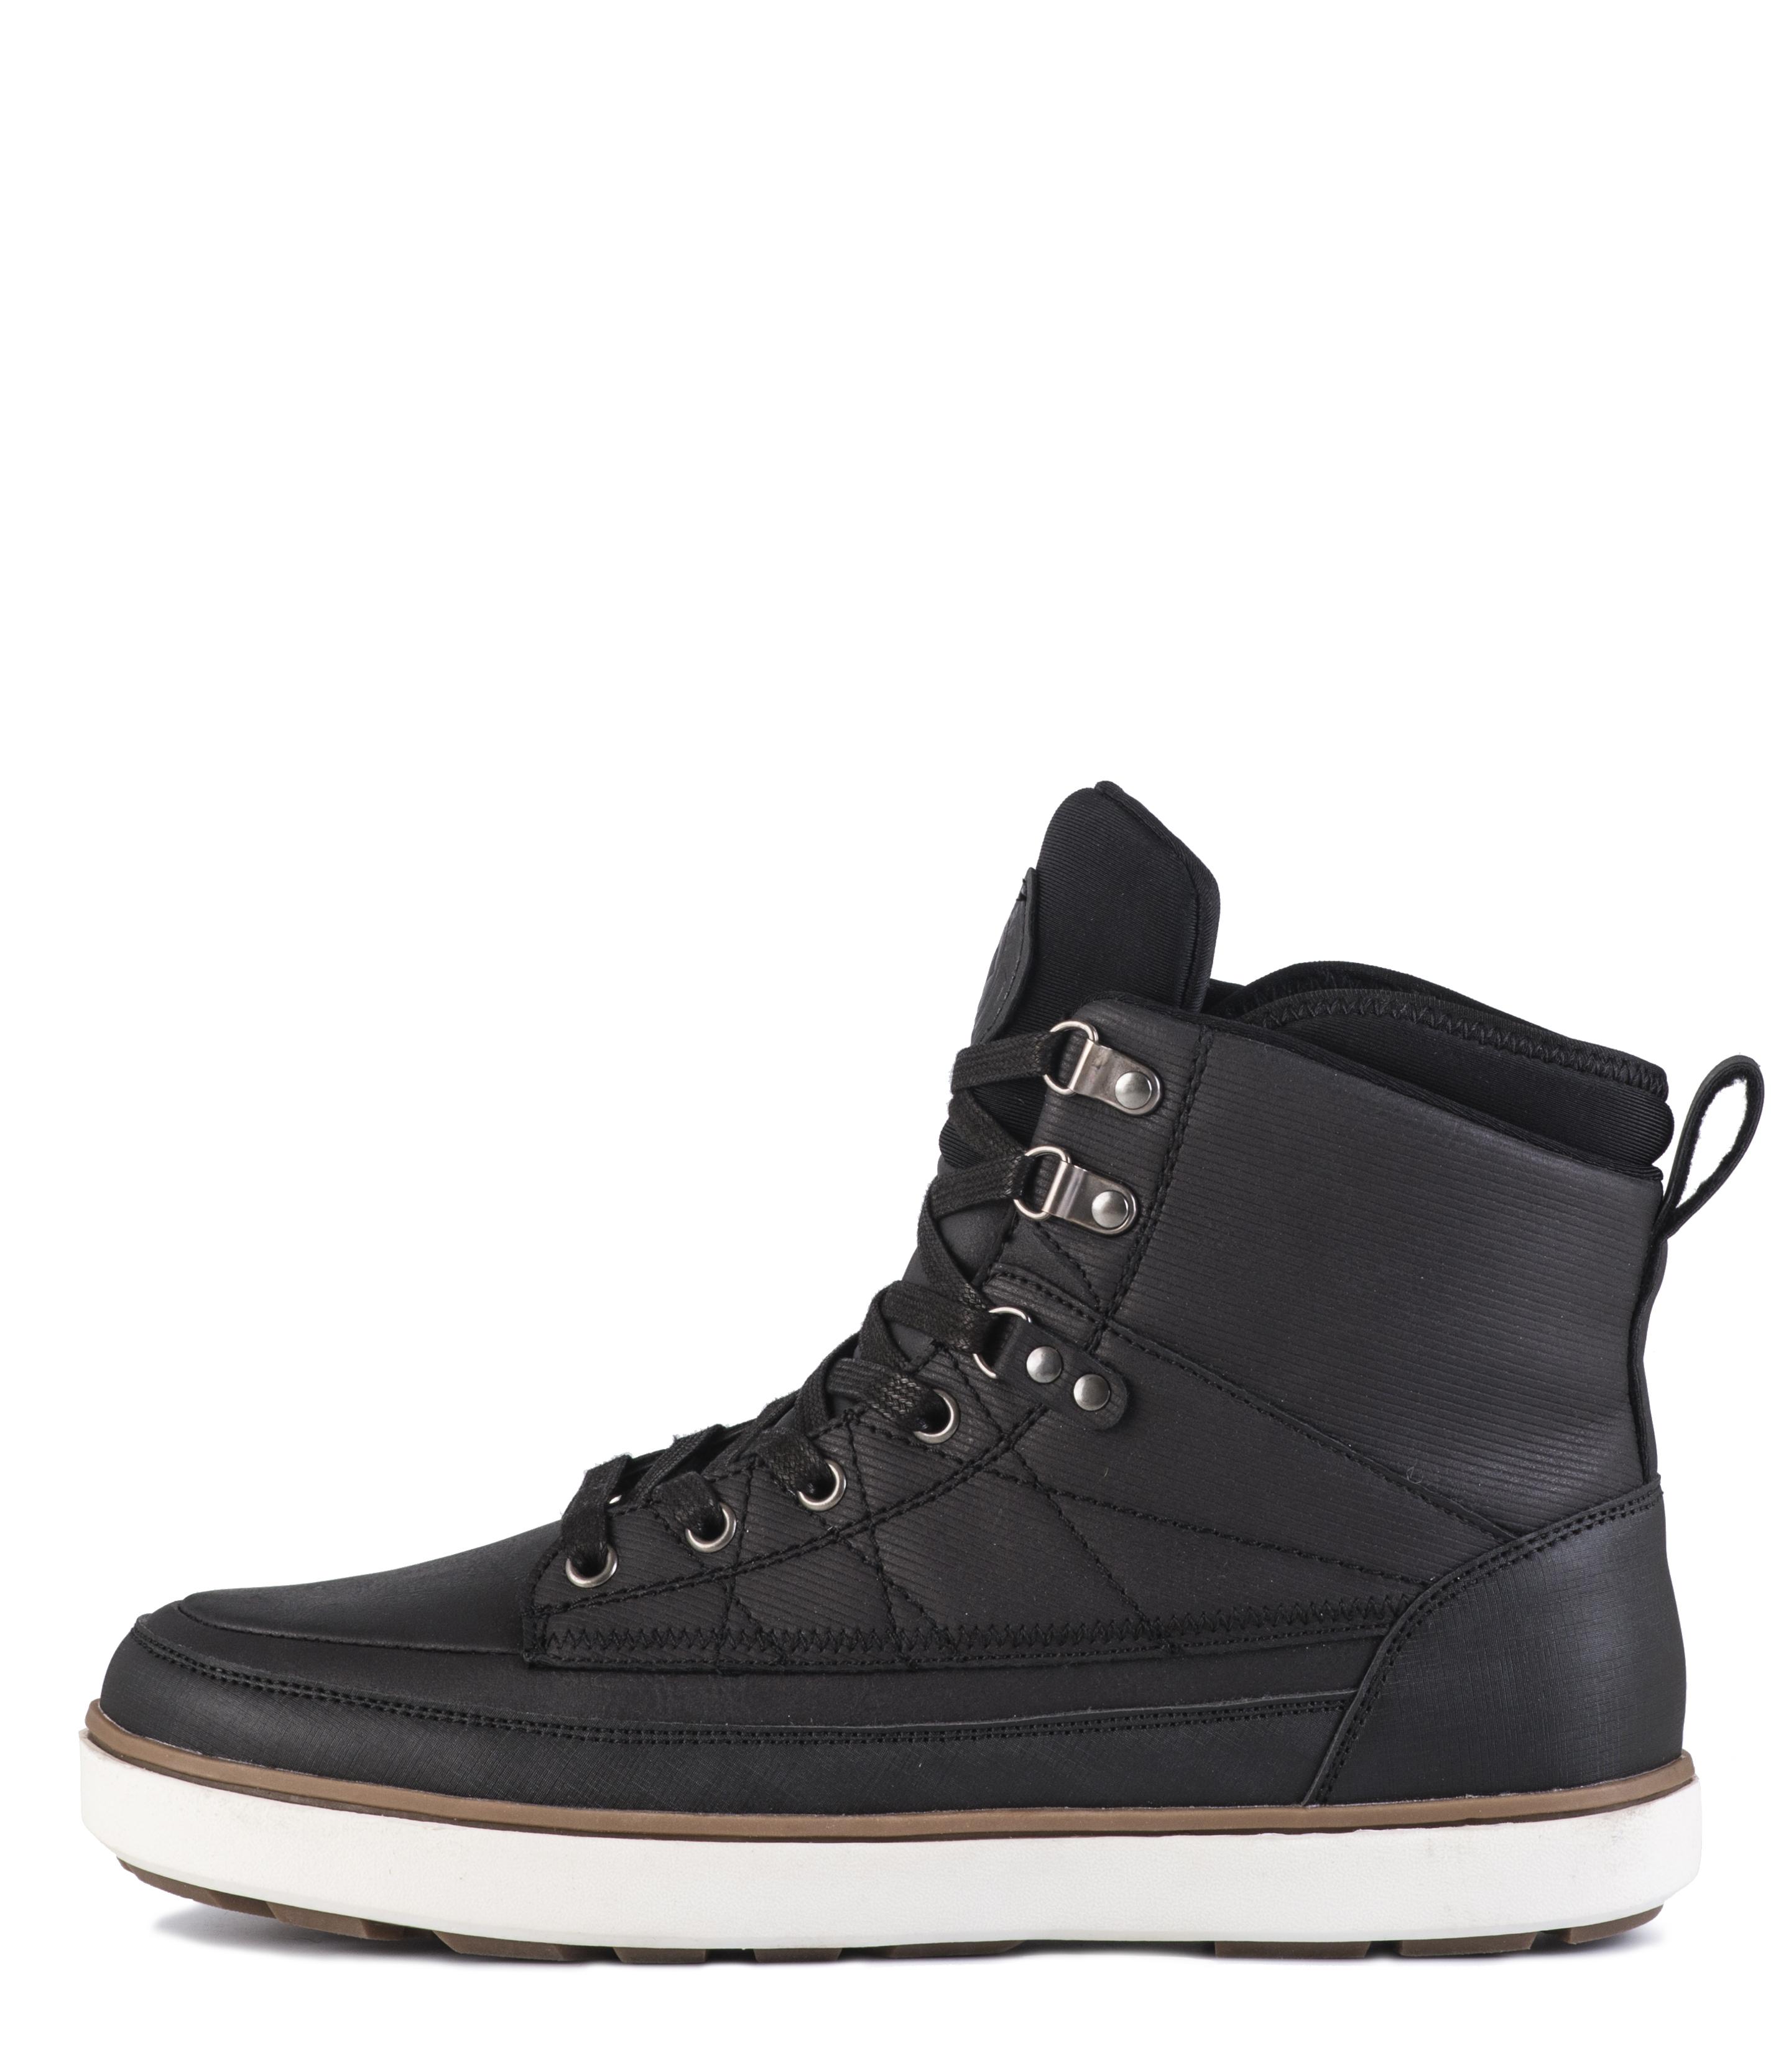 DSW shoes for MENS - Winter Boots shoes